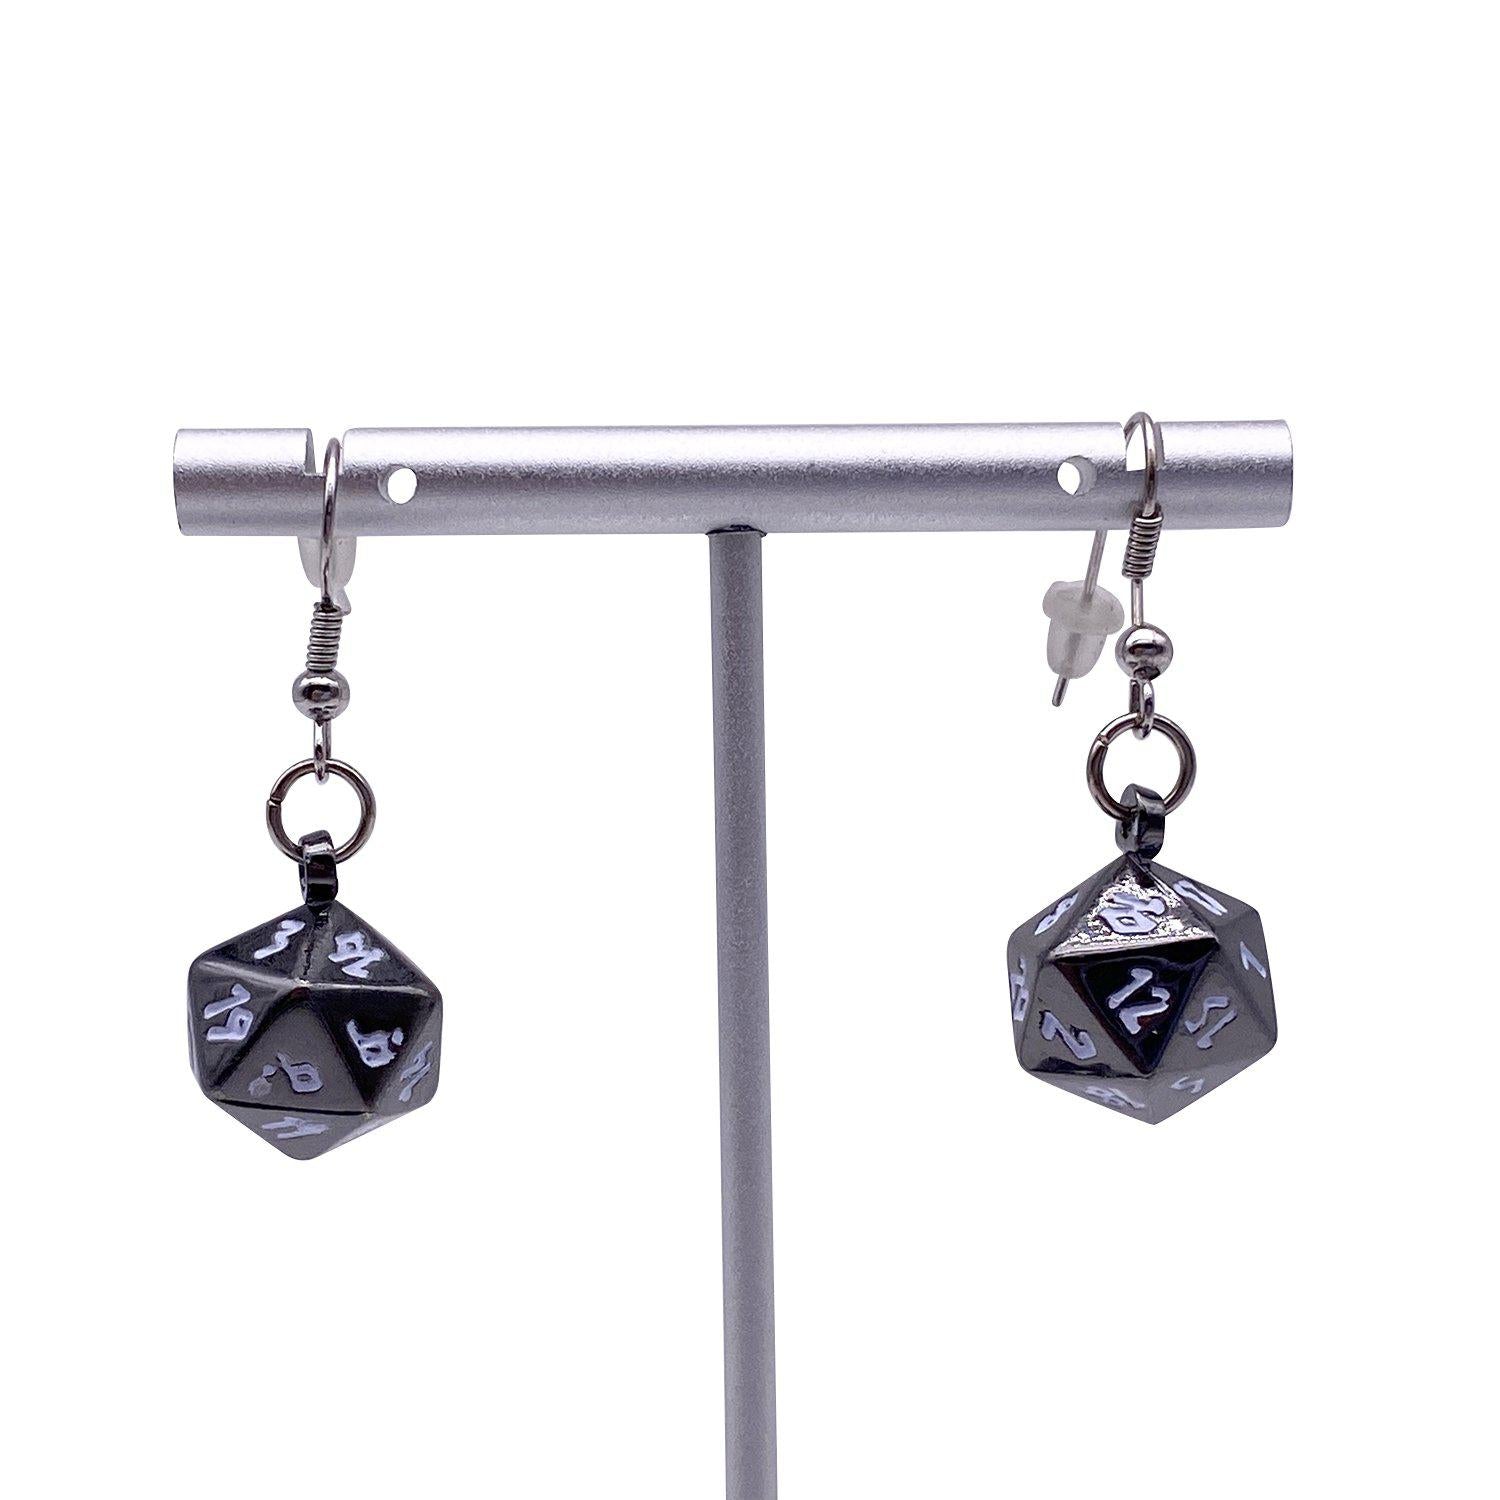 Drow Black - Ioun Stone D20 Dice Earrings by Norse Foundry